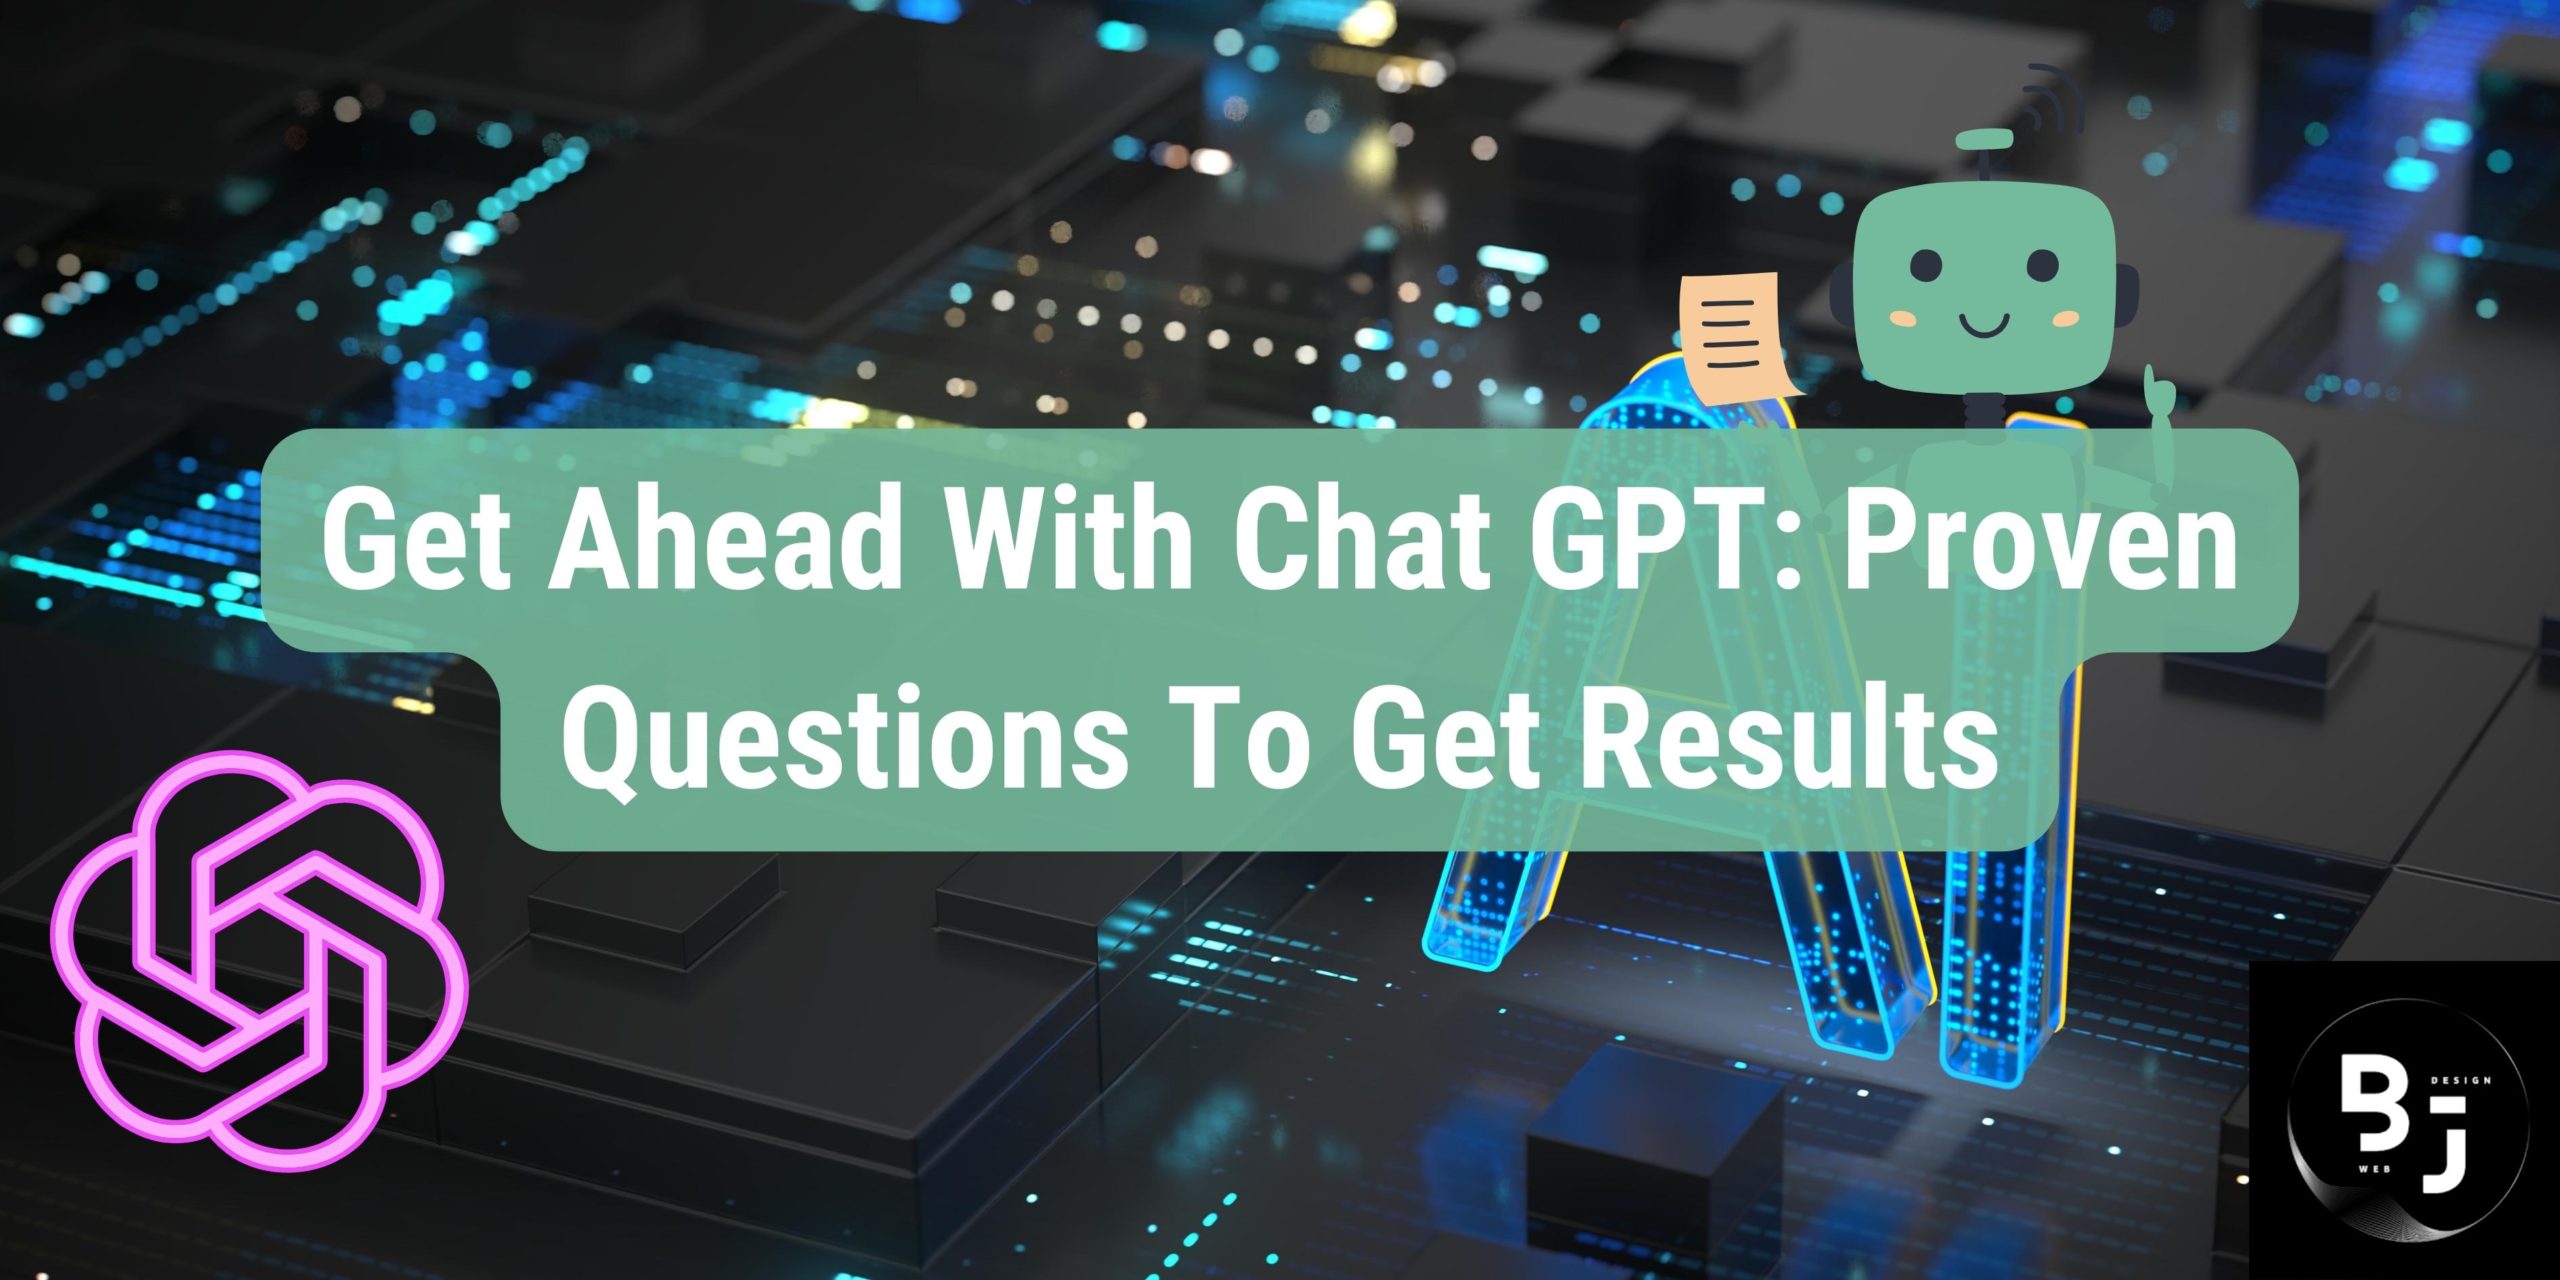 Get Ahead With Chat GPT: Proven Questions To Get Results